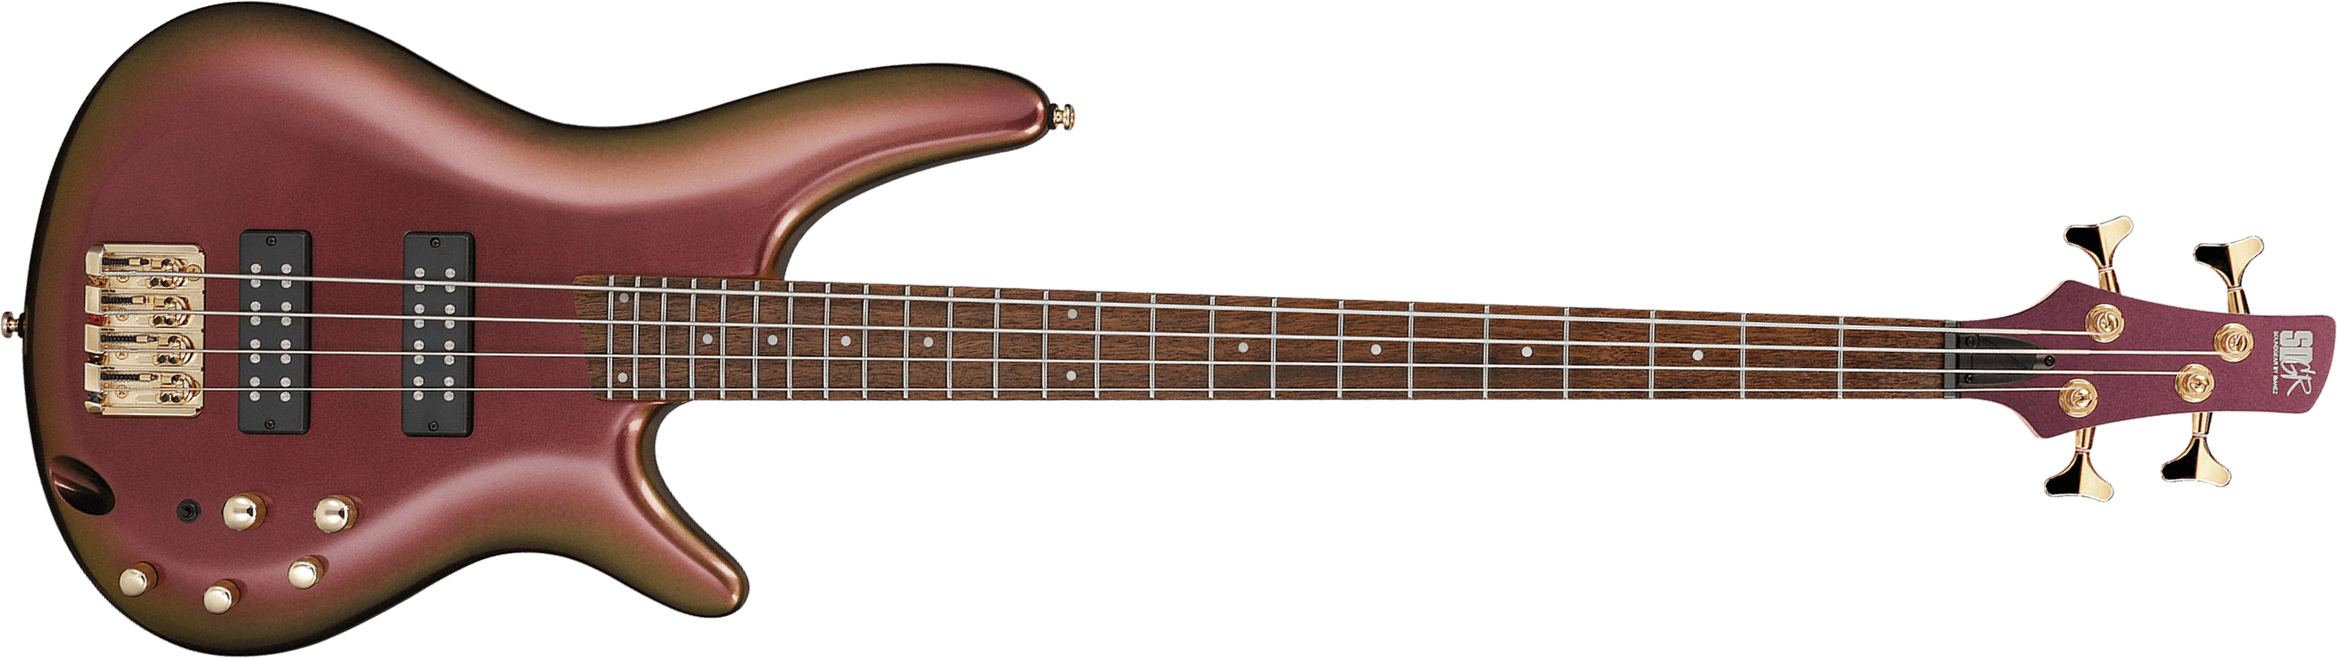 Ibanez Sr300edx Rgc Standard Active Jat - Rose Gold Chameleon - Solid body electric bass - Main picture